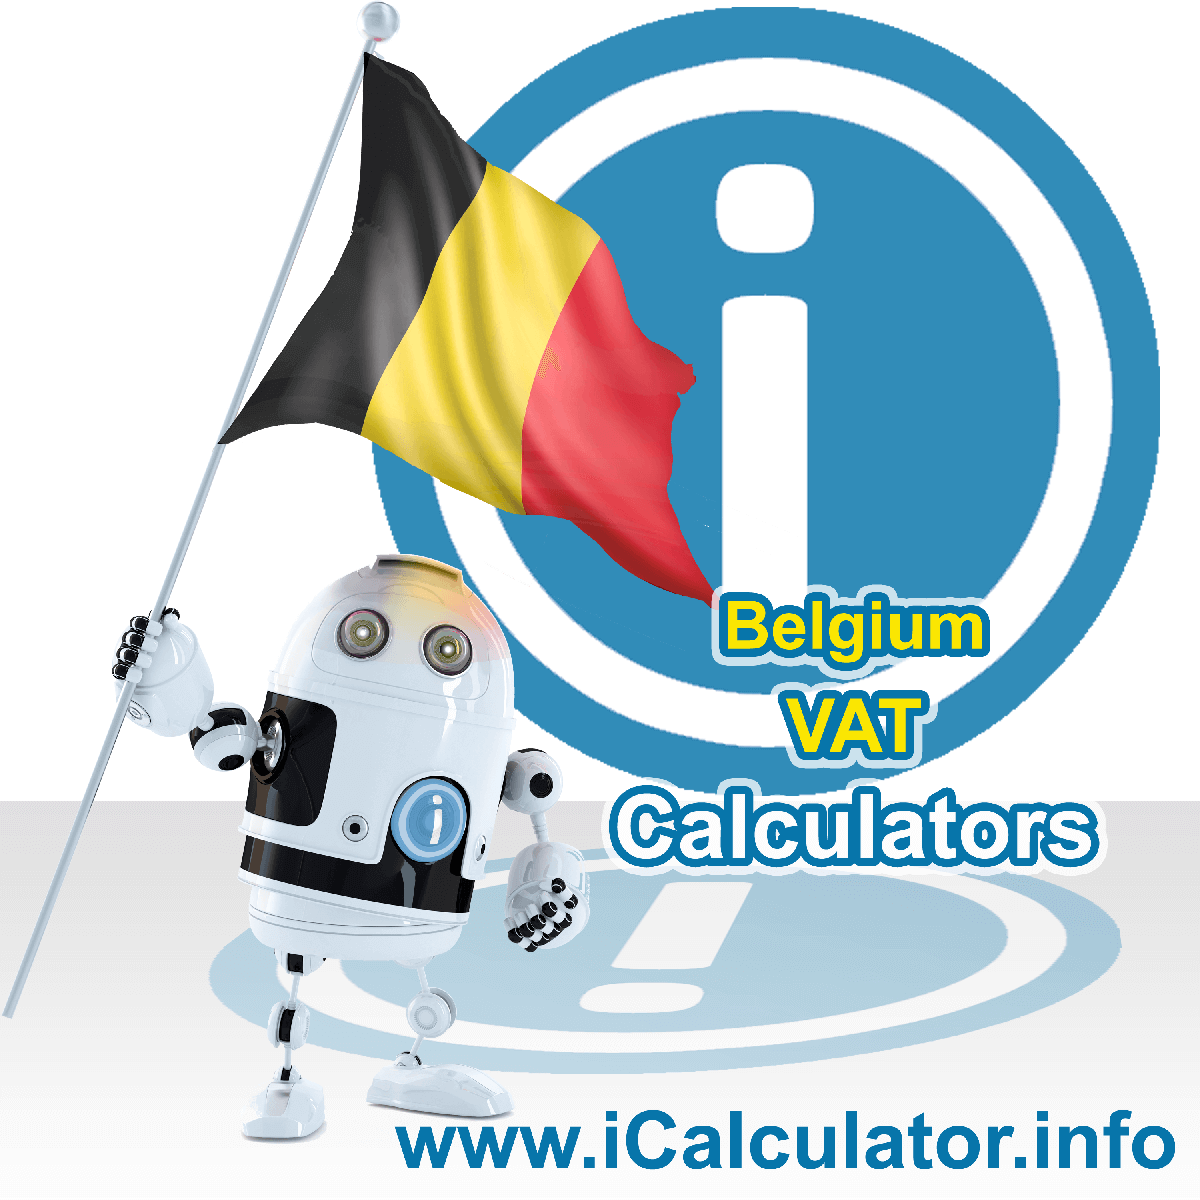 Belgium VAT Calculator. This image shows the Belgium flag and information relating to the VAT formula used for calculating Value Added Tax in Belgium using the Belgium VAT Calculator in 2023